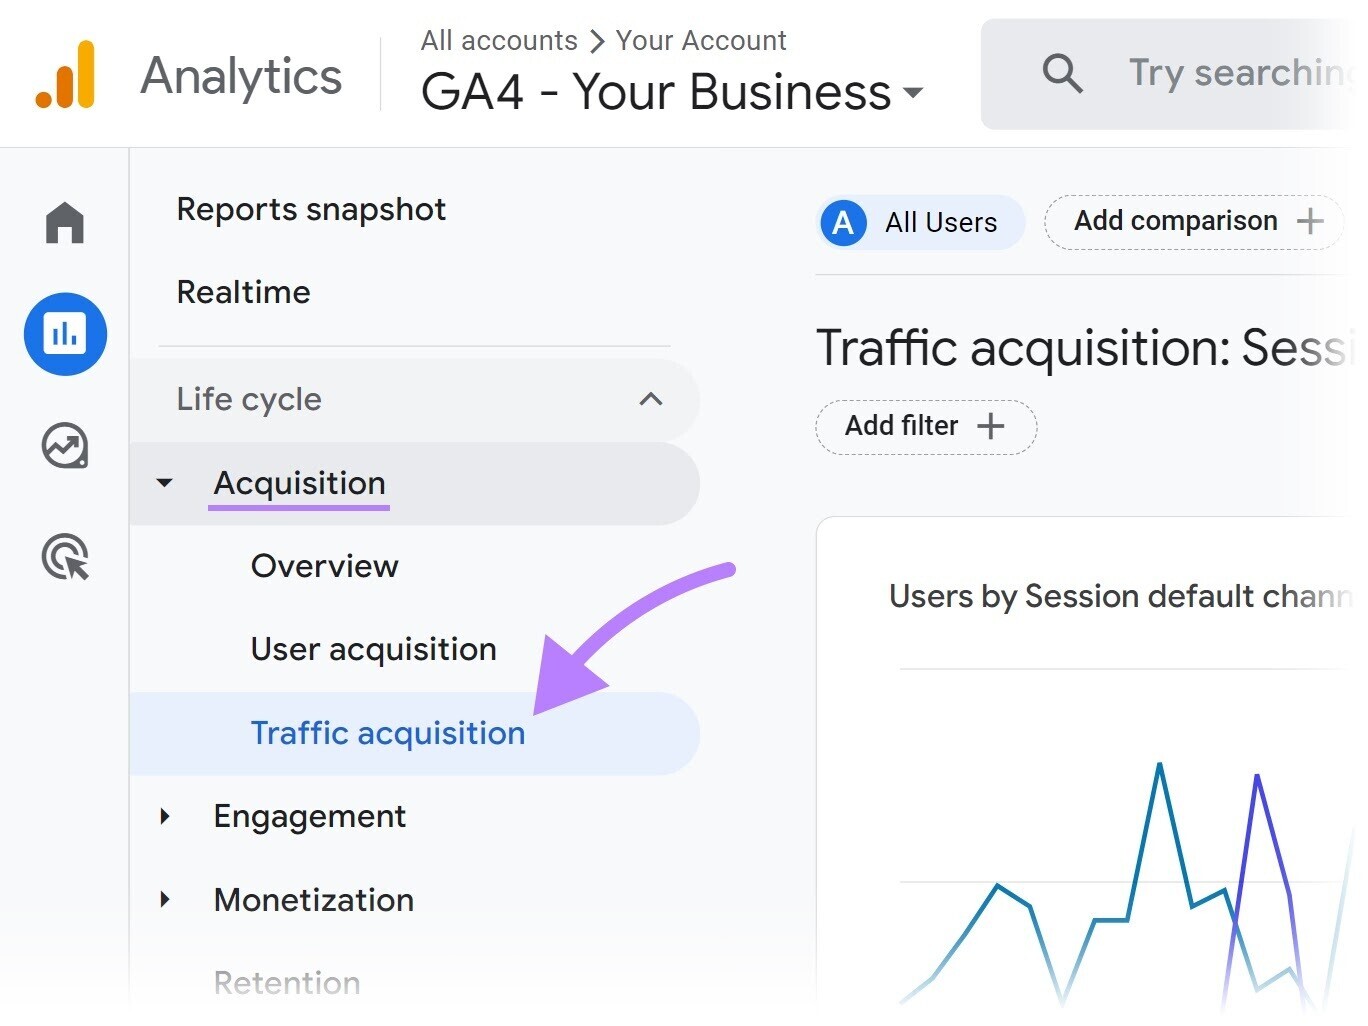 Navigating to “Traffic acquisition” in GA4